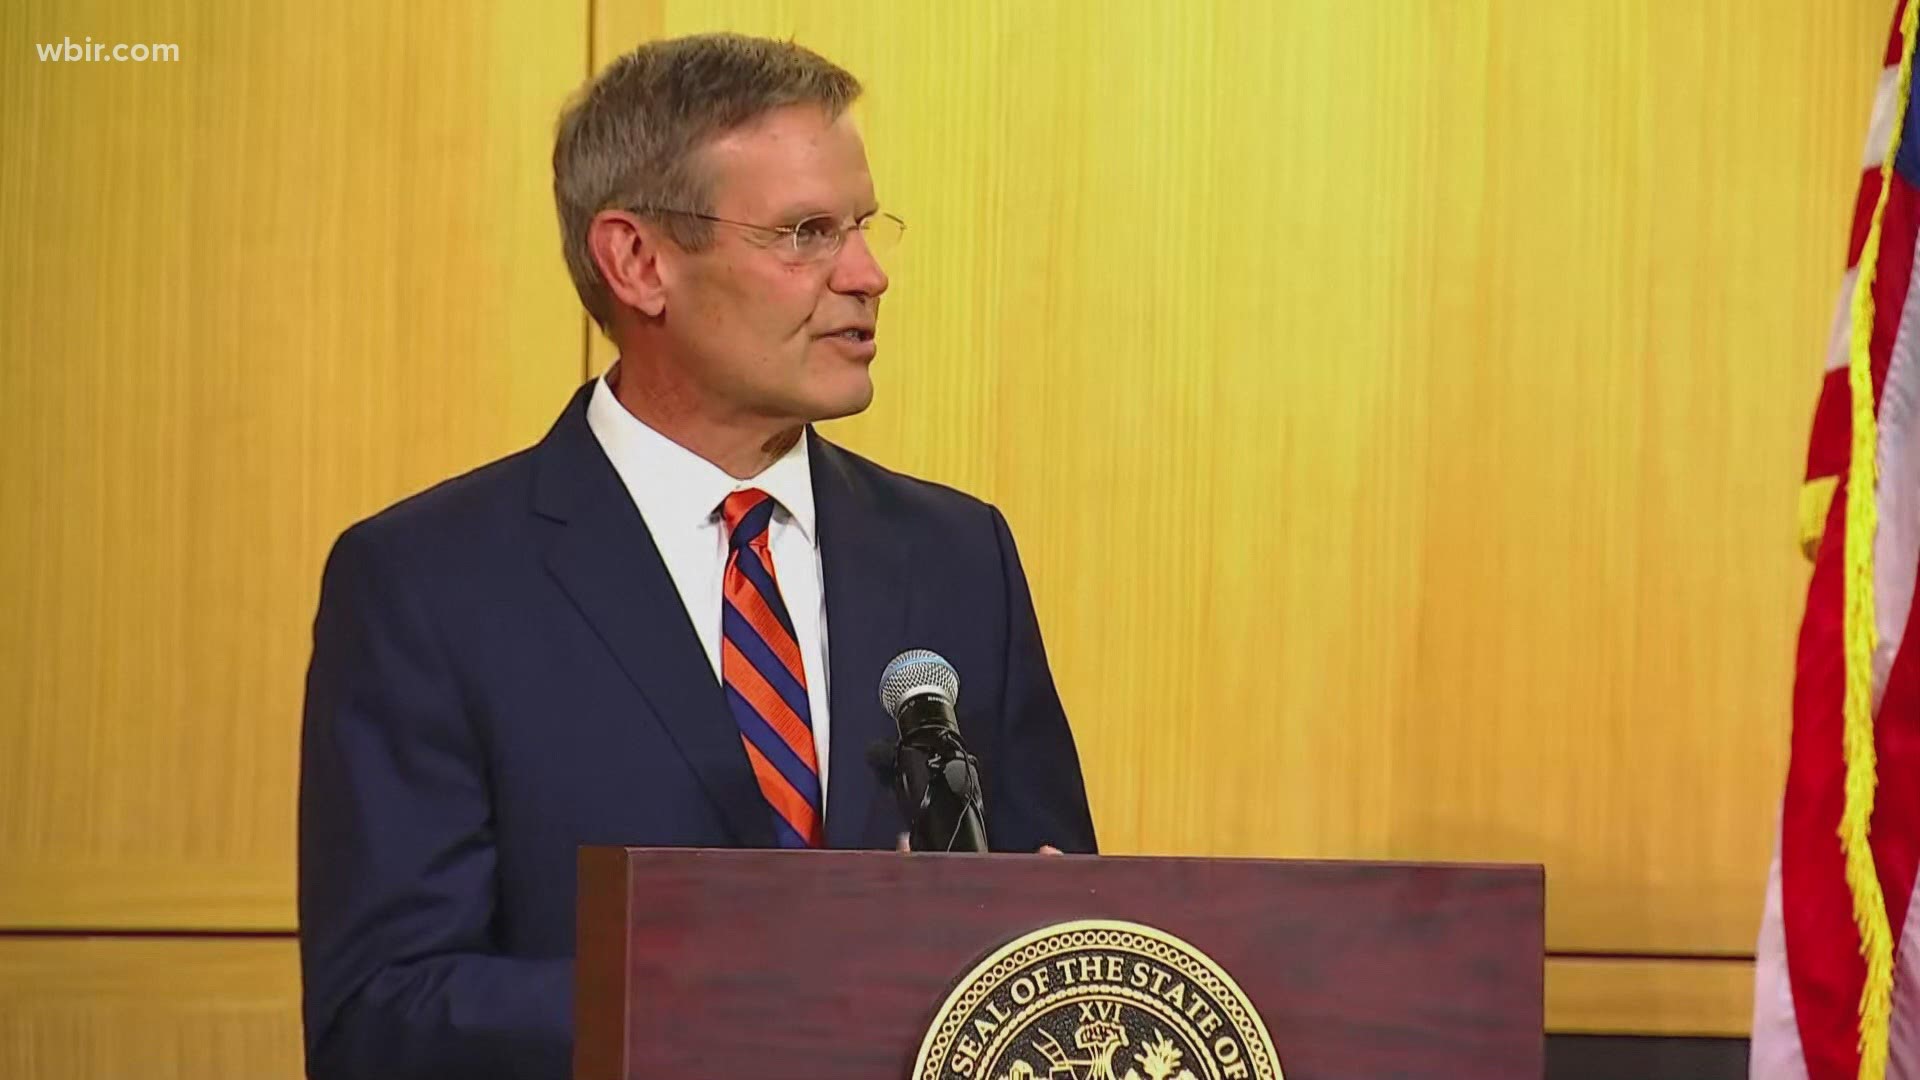 Tennessee Governor Bill Lee signed two new bills into law today focused on criminal justice reform.